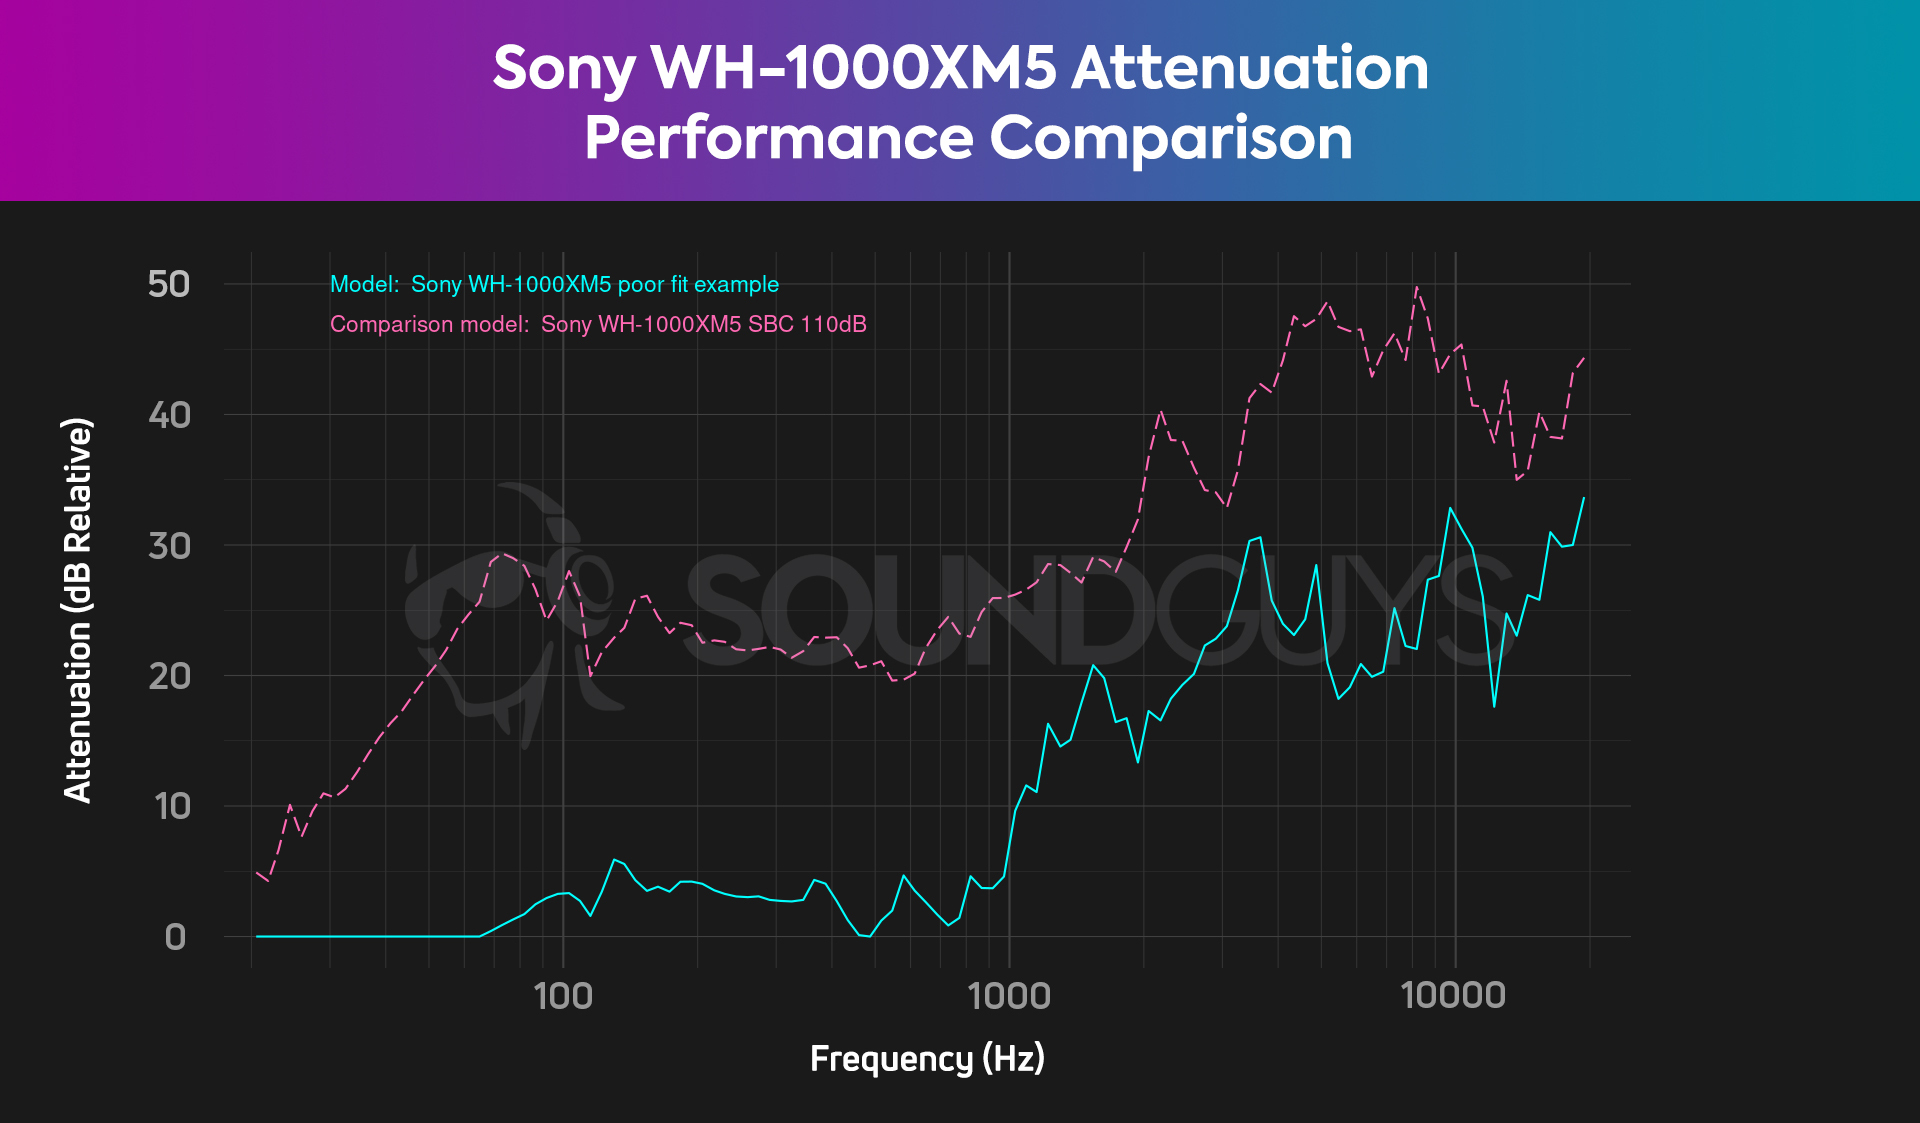 The Sony WH-1000XM5 shows much poorer ANC performance on this chart, shown in cyan.